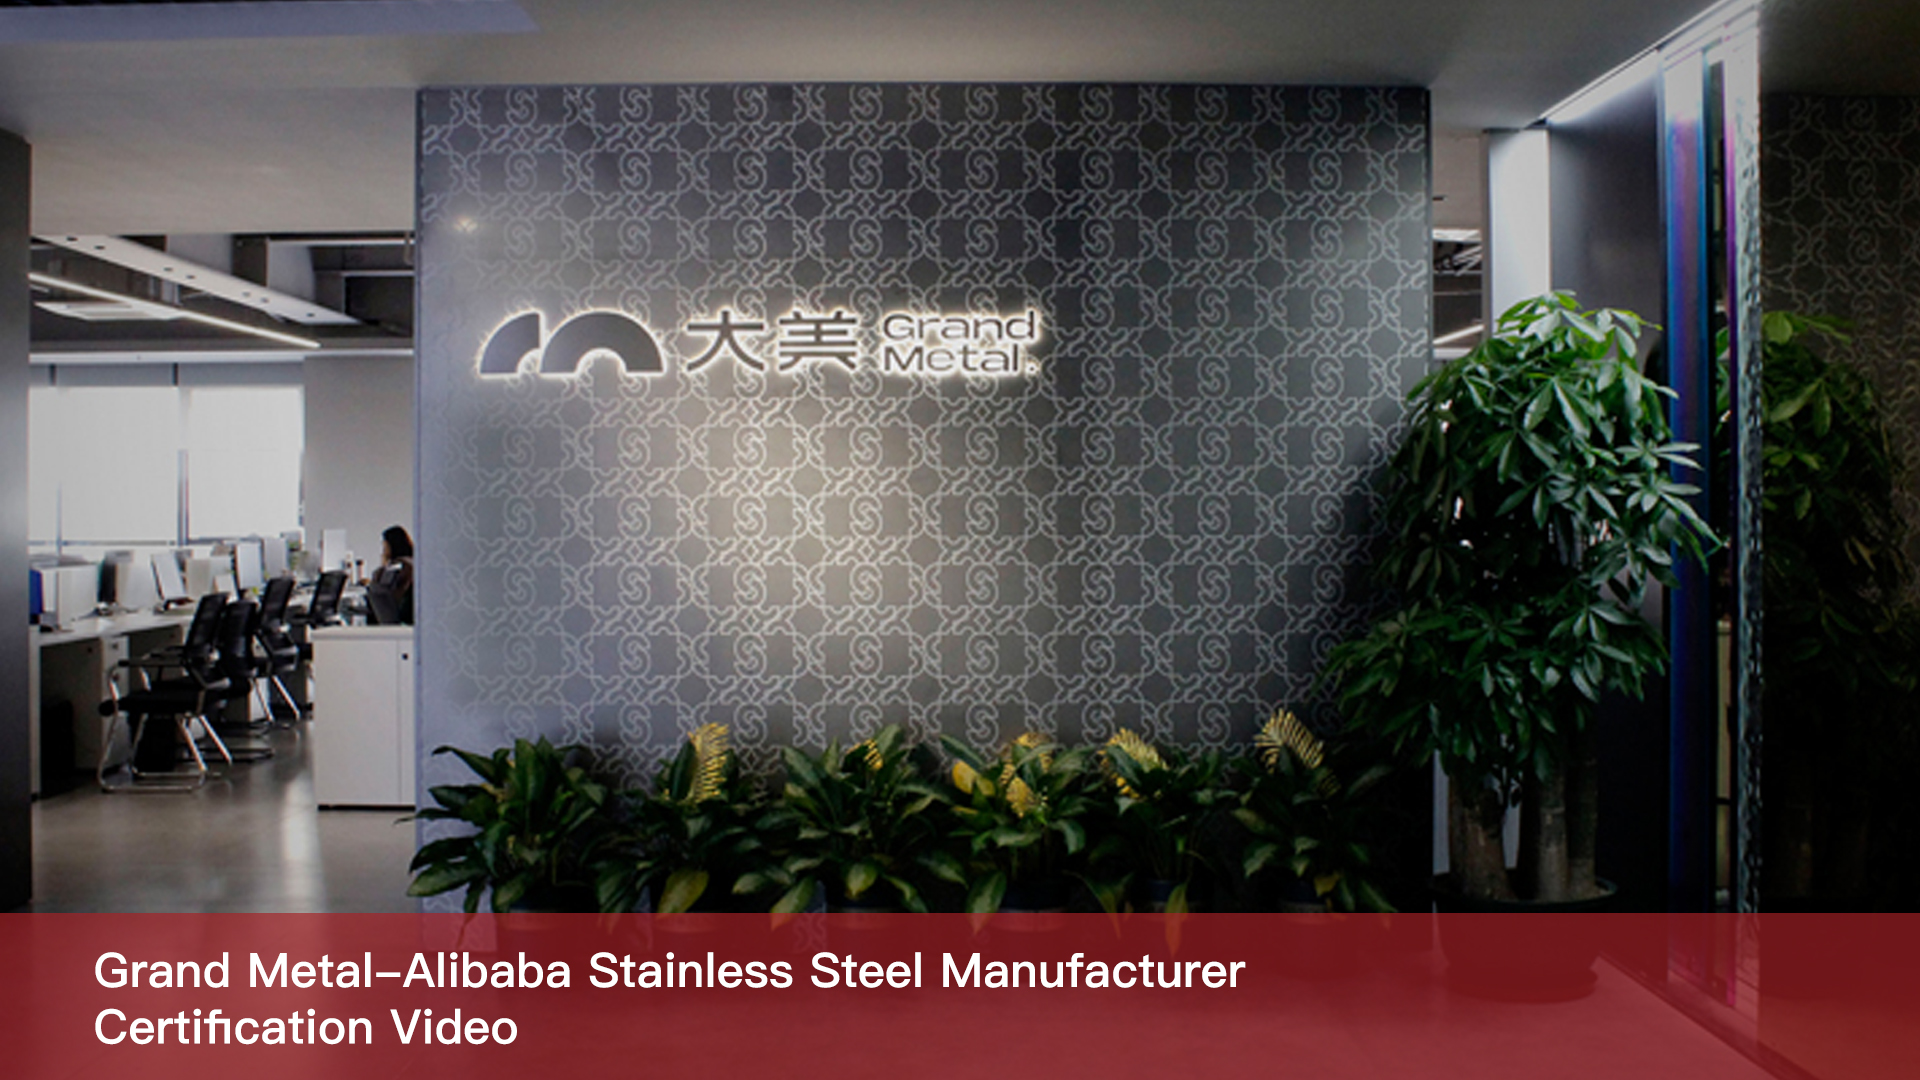 Grand Metal-Alibaba Stainless Steel Manufacturer Certification Video